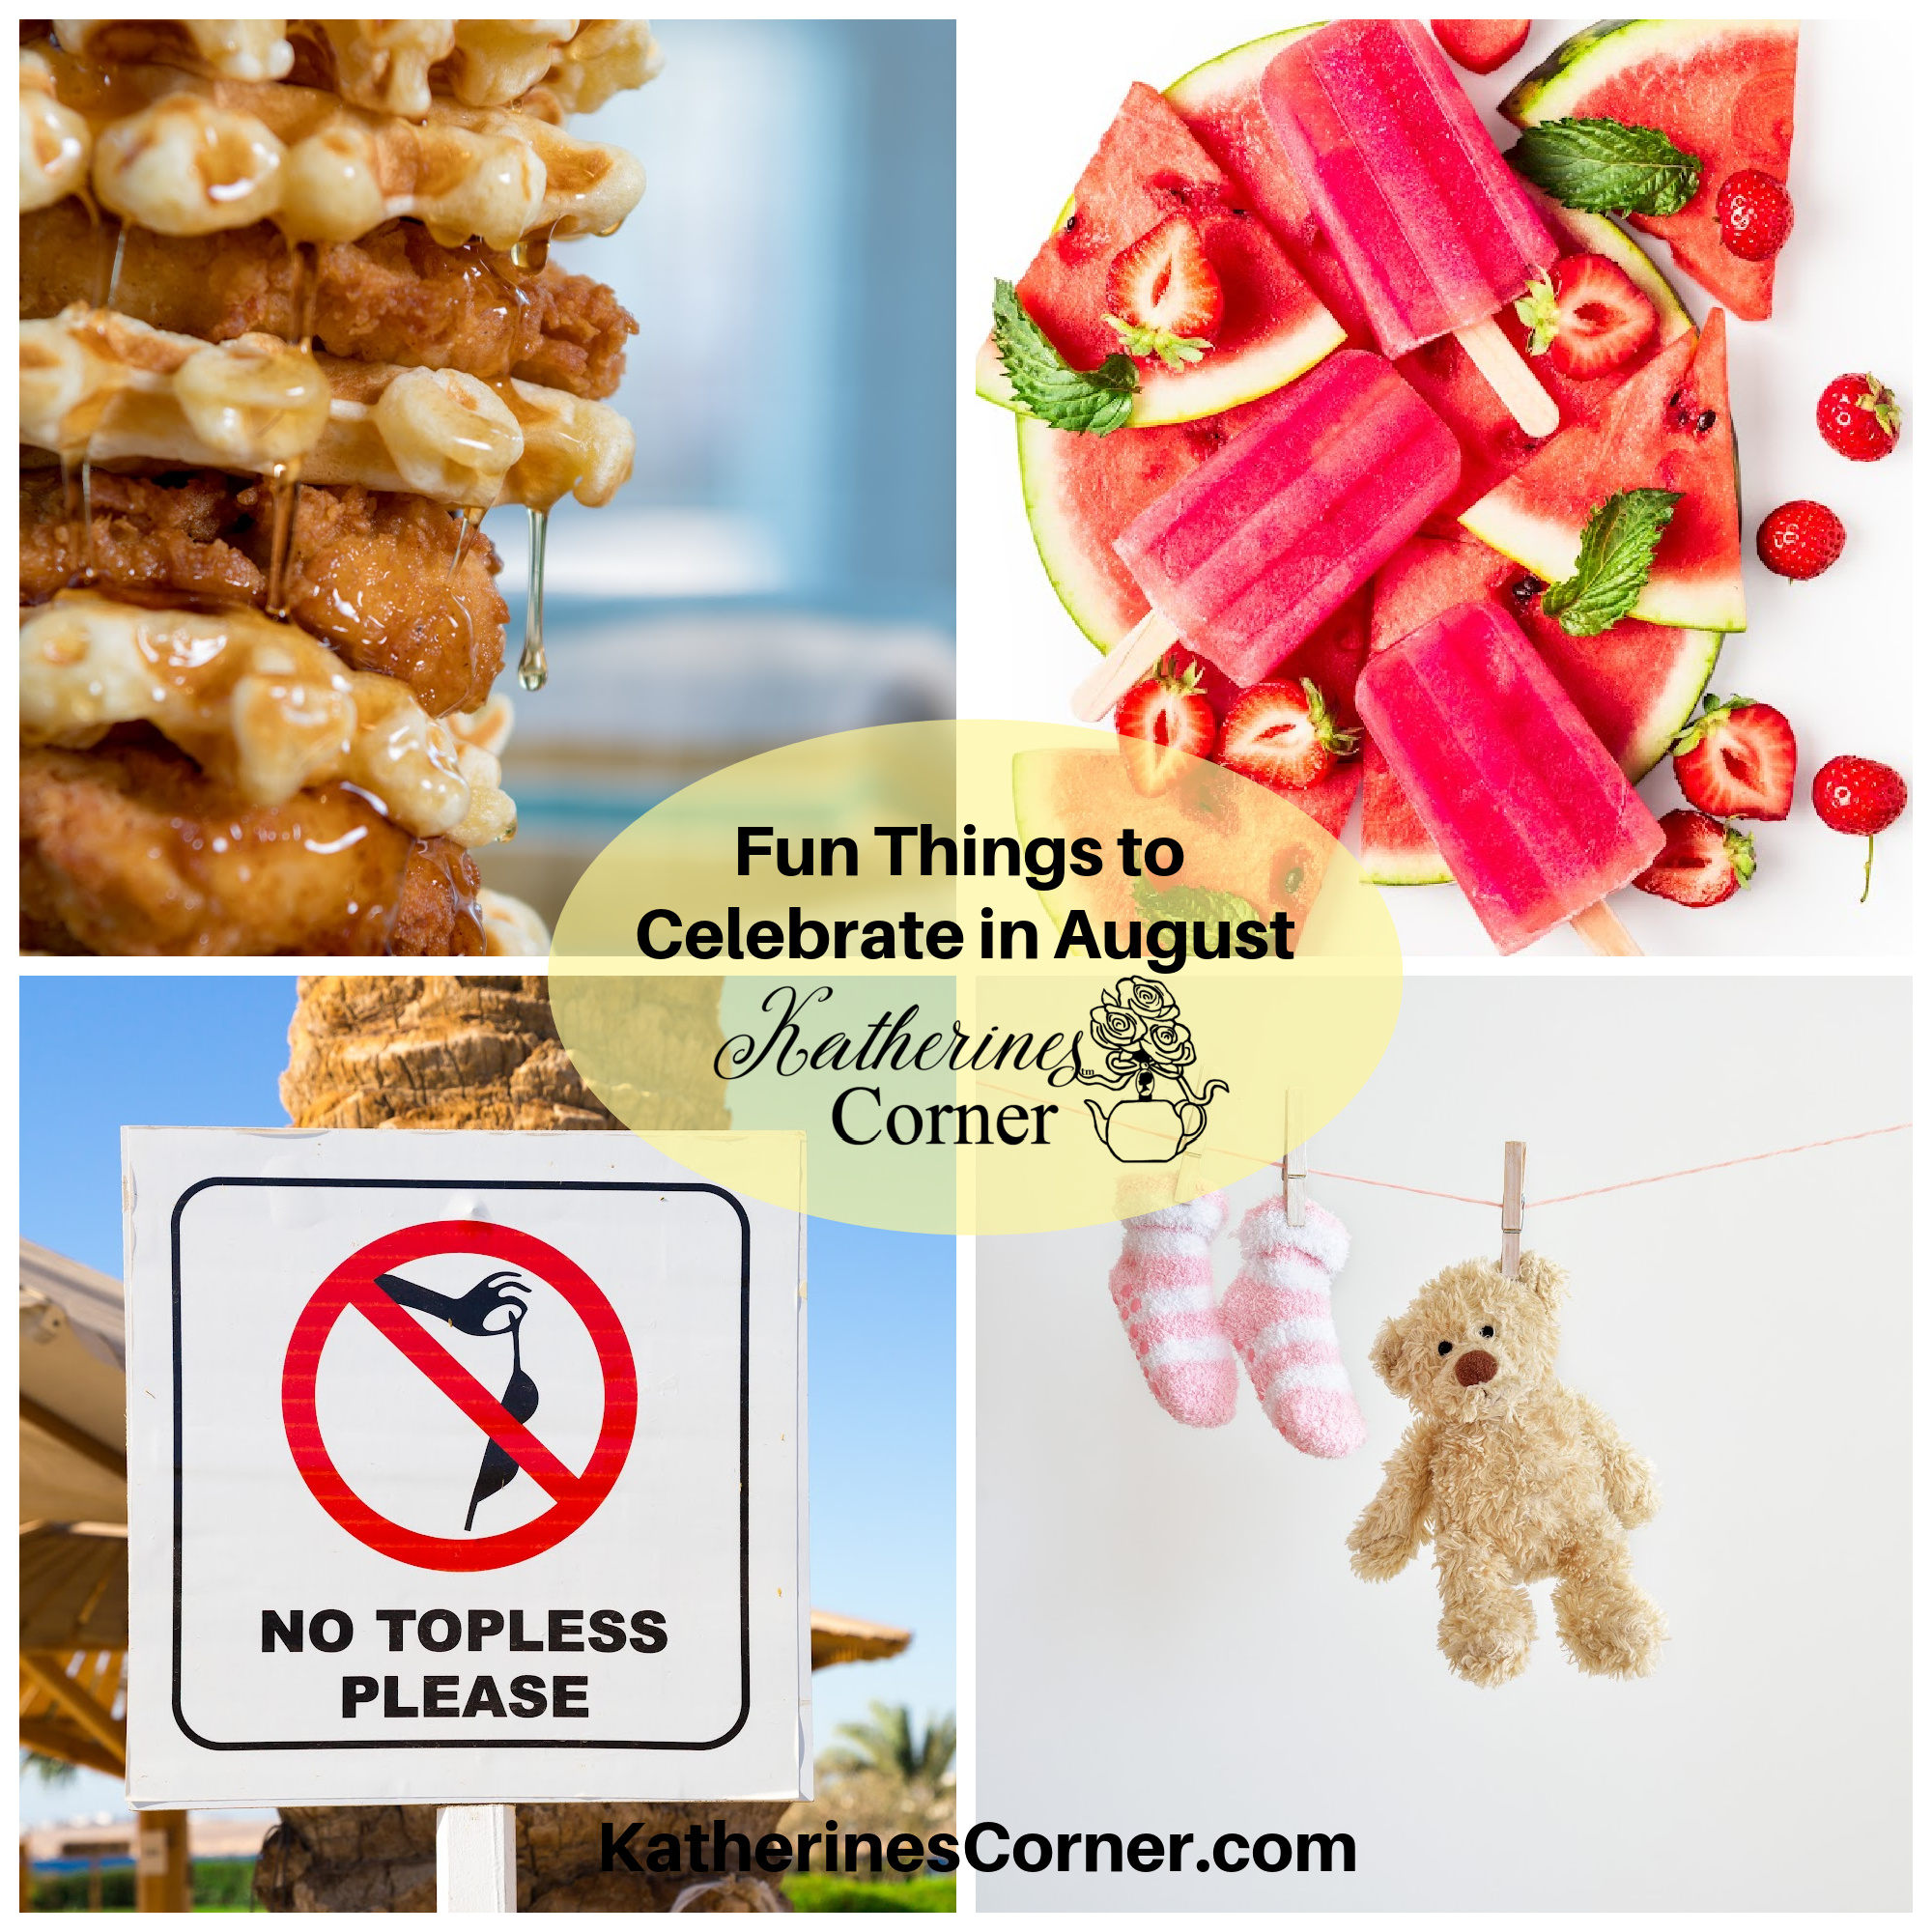 Fun Things to Celebrate in August